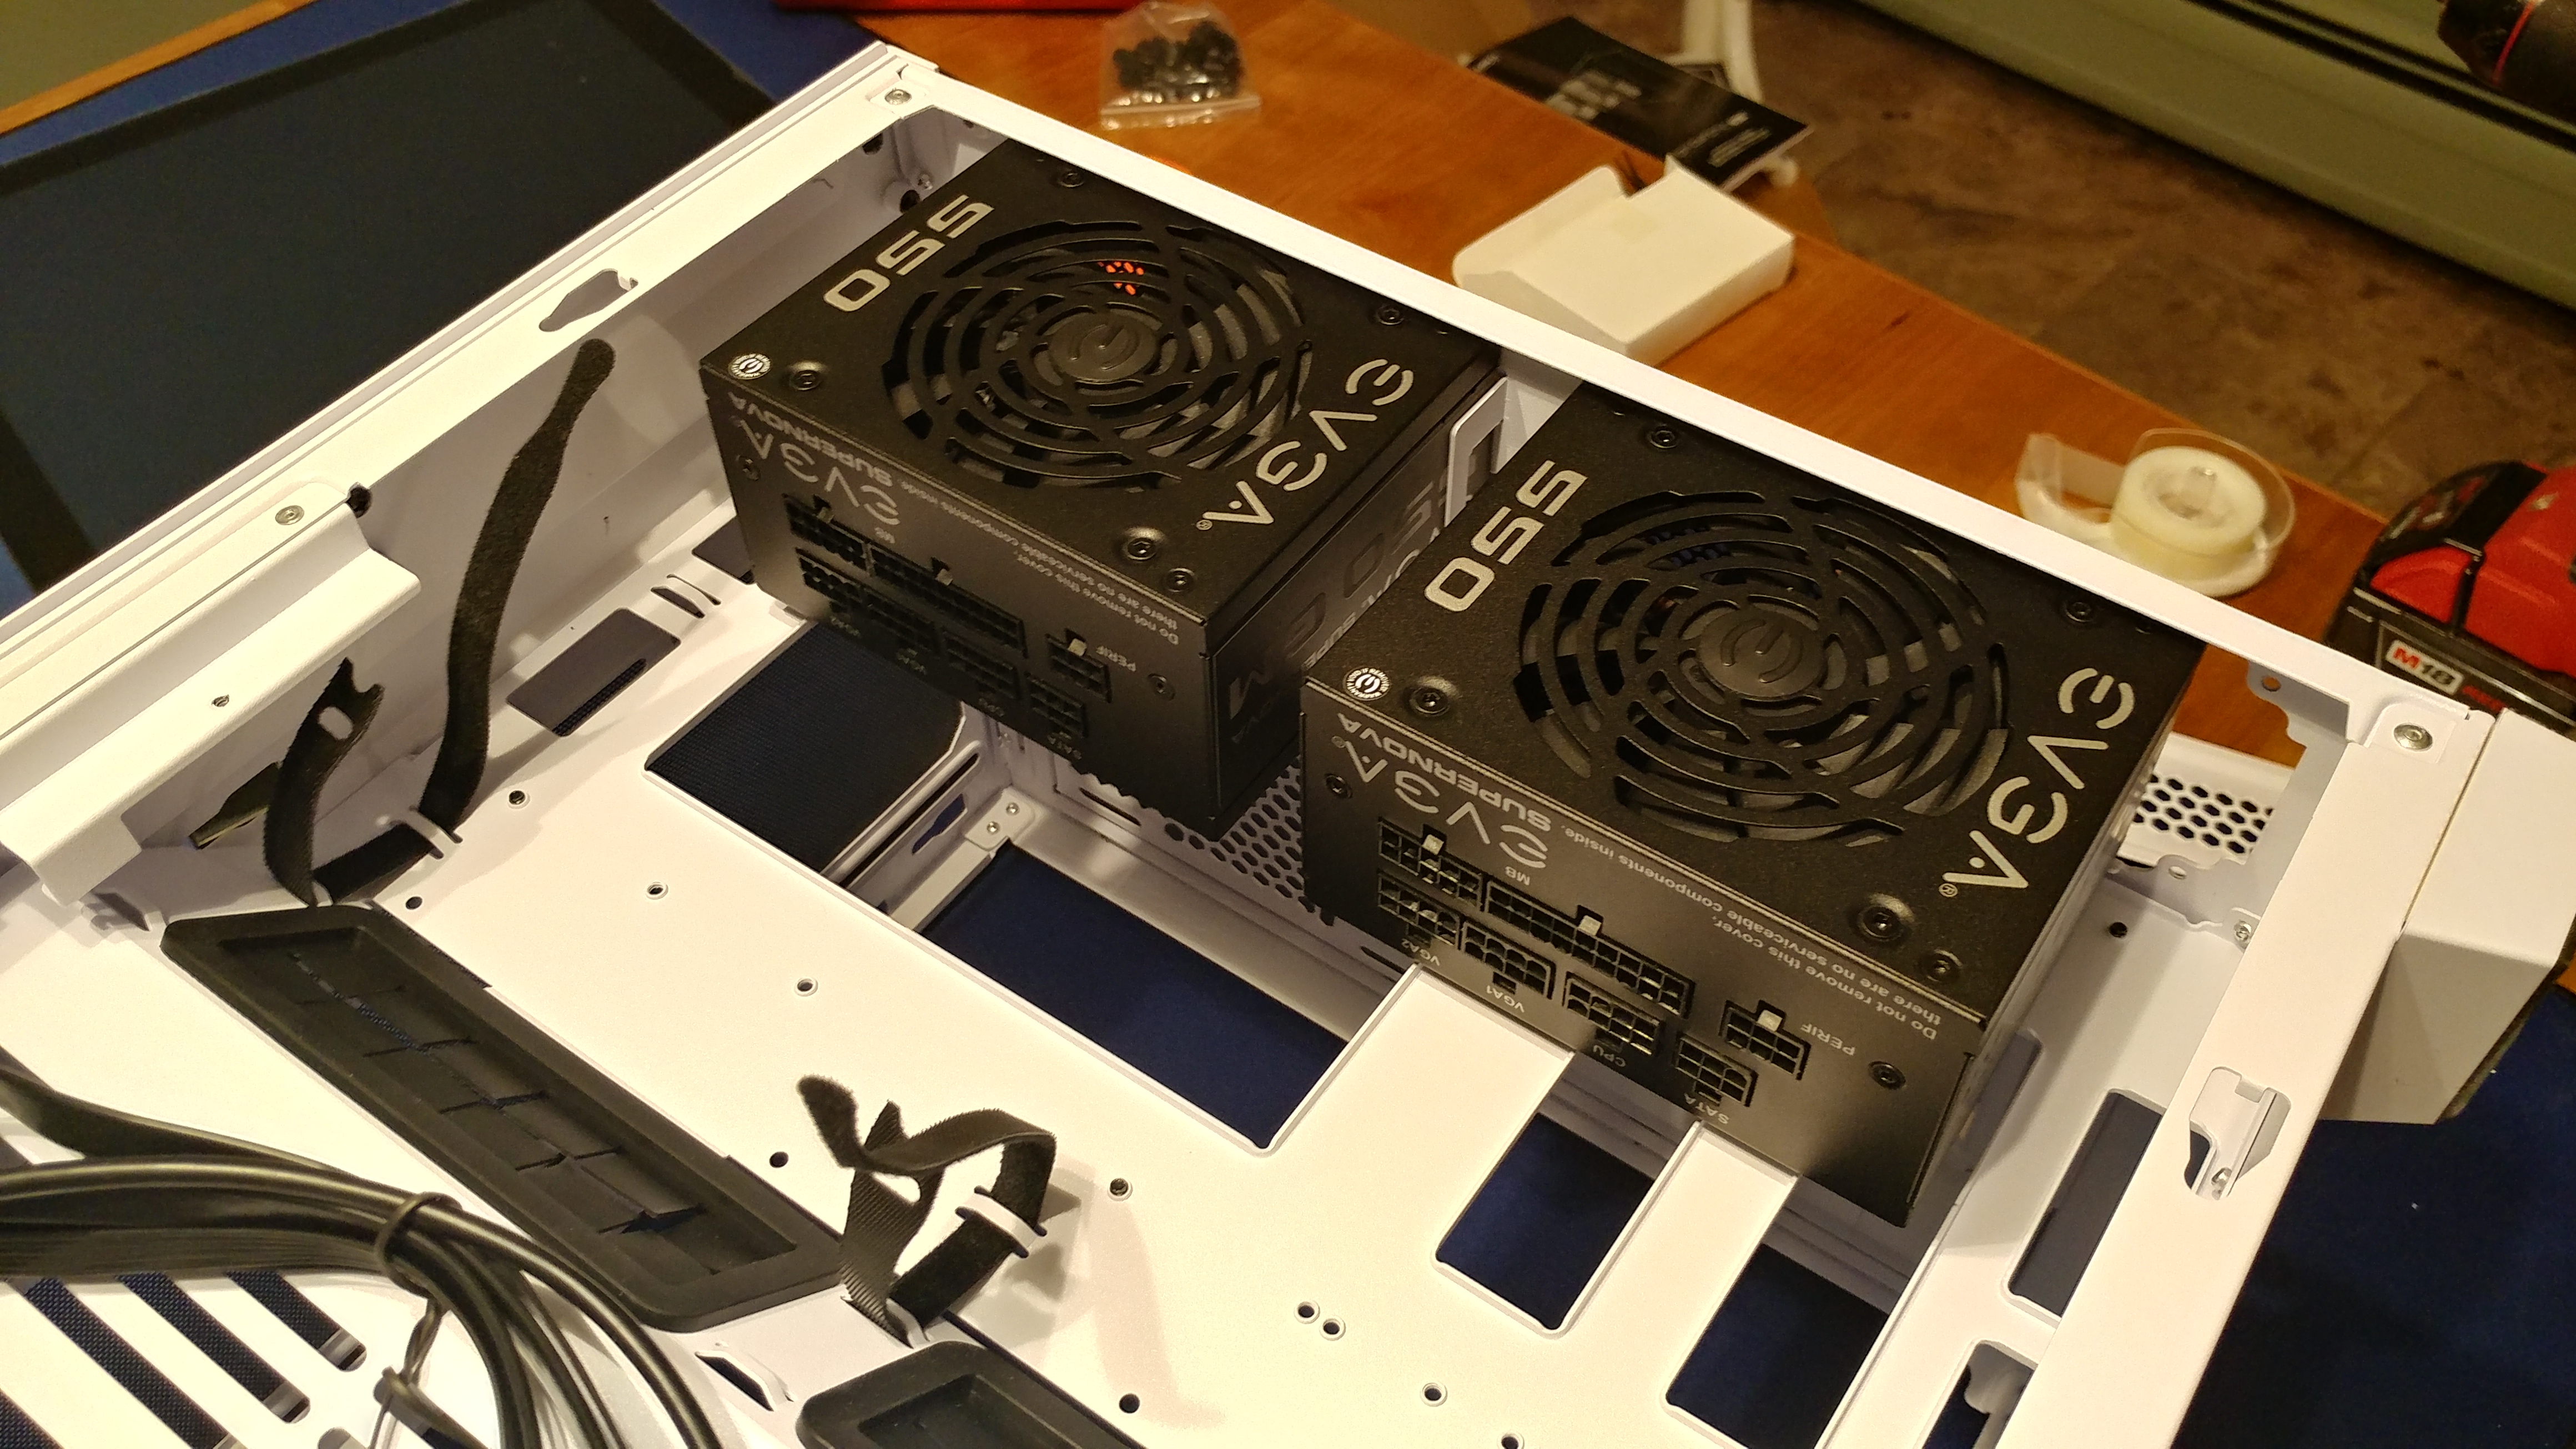 Losing the hard drive cage allows two SFX PSUs to be installed